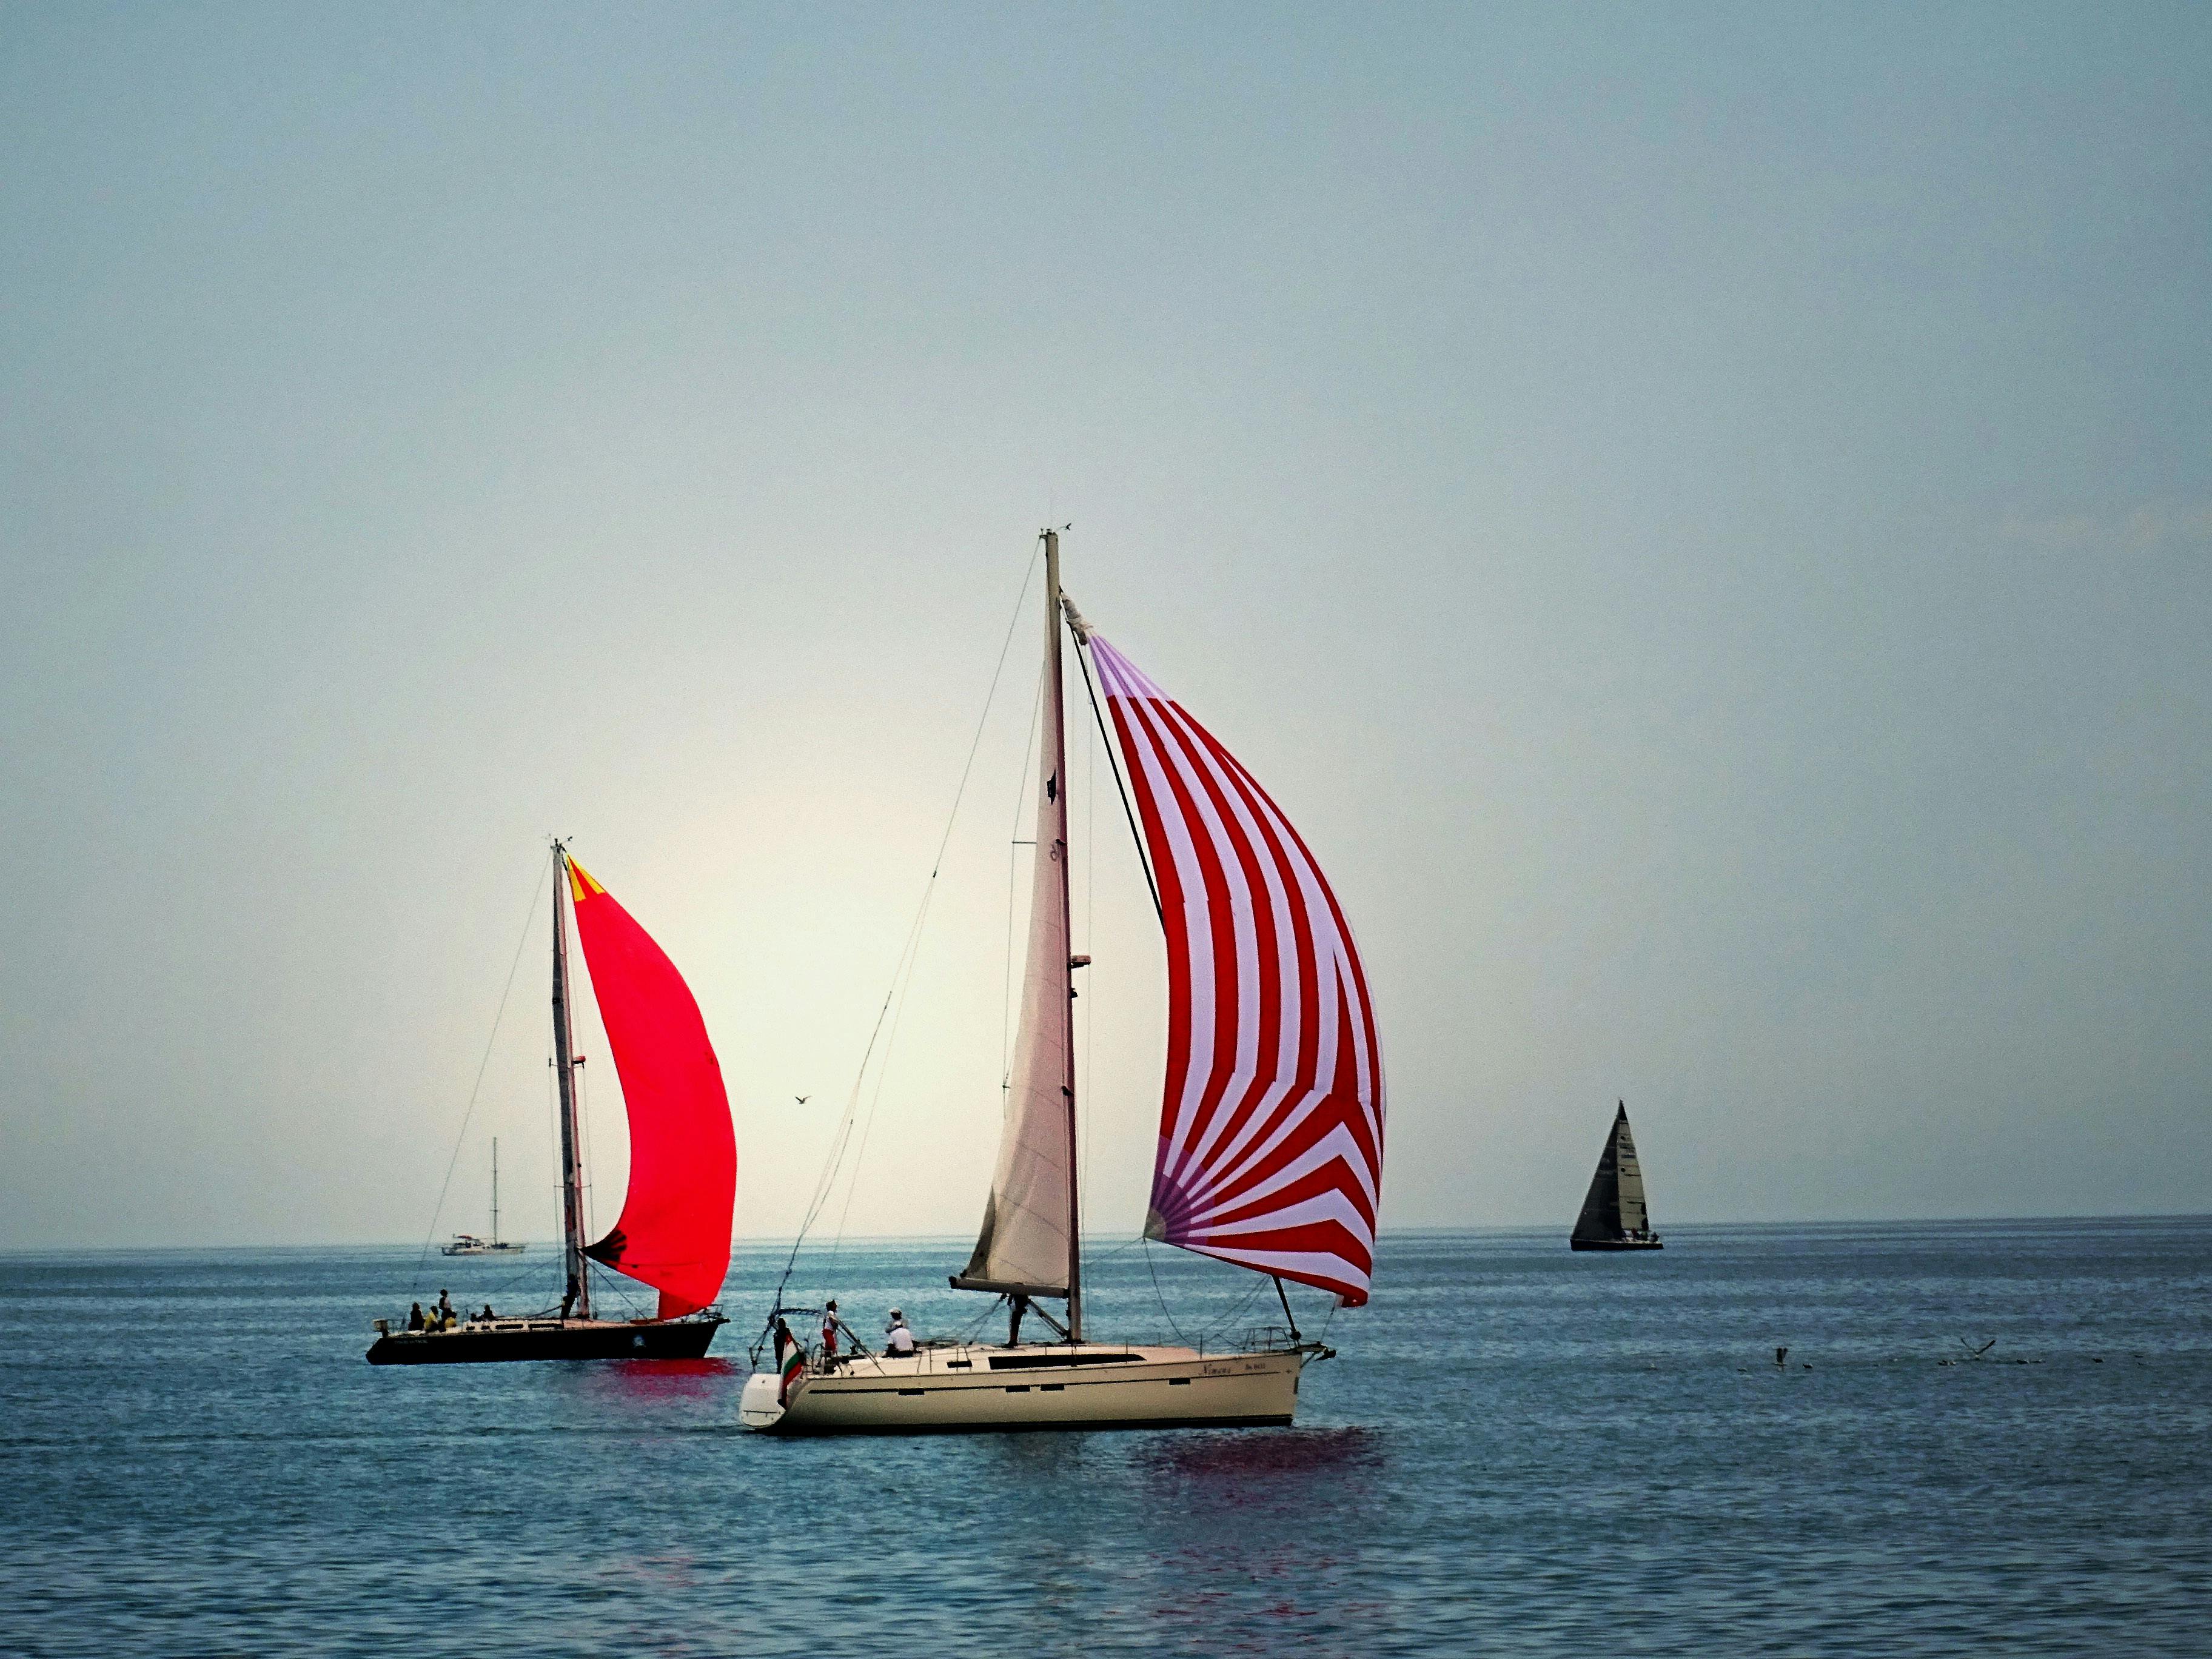 sailboats on water images